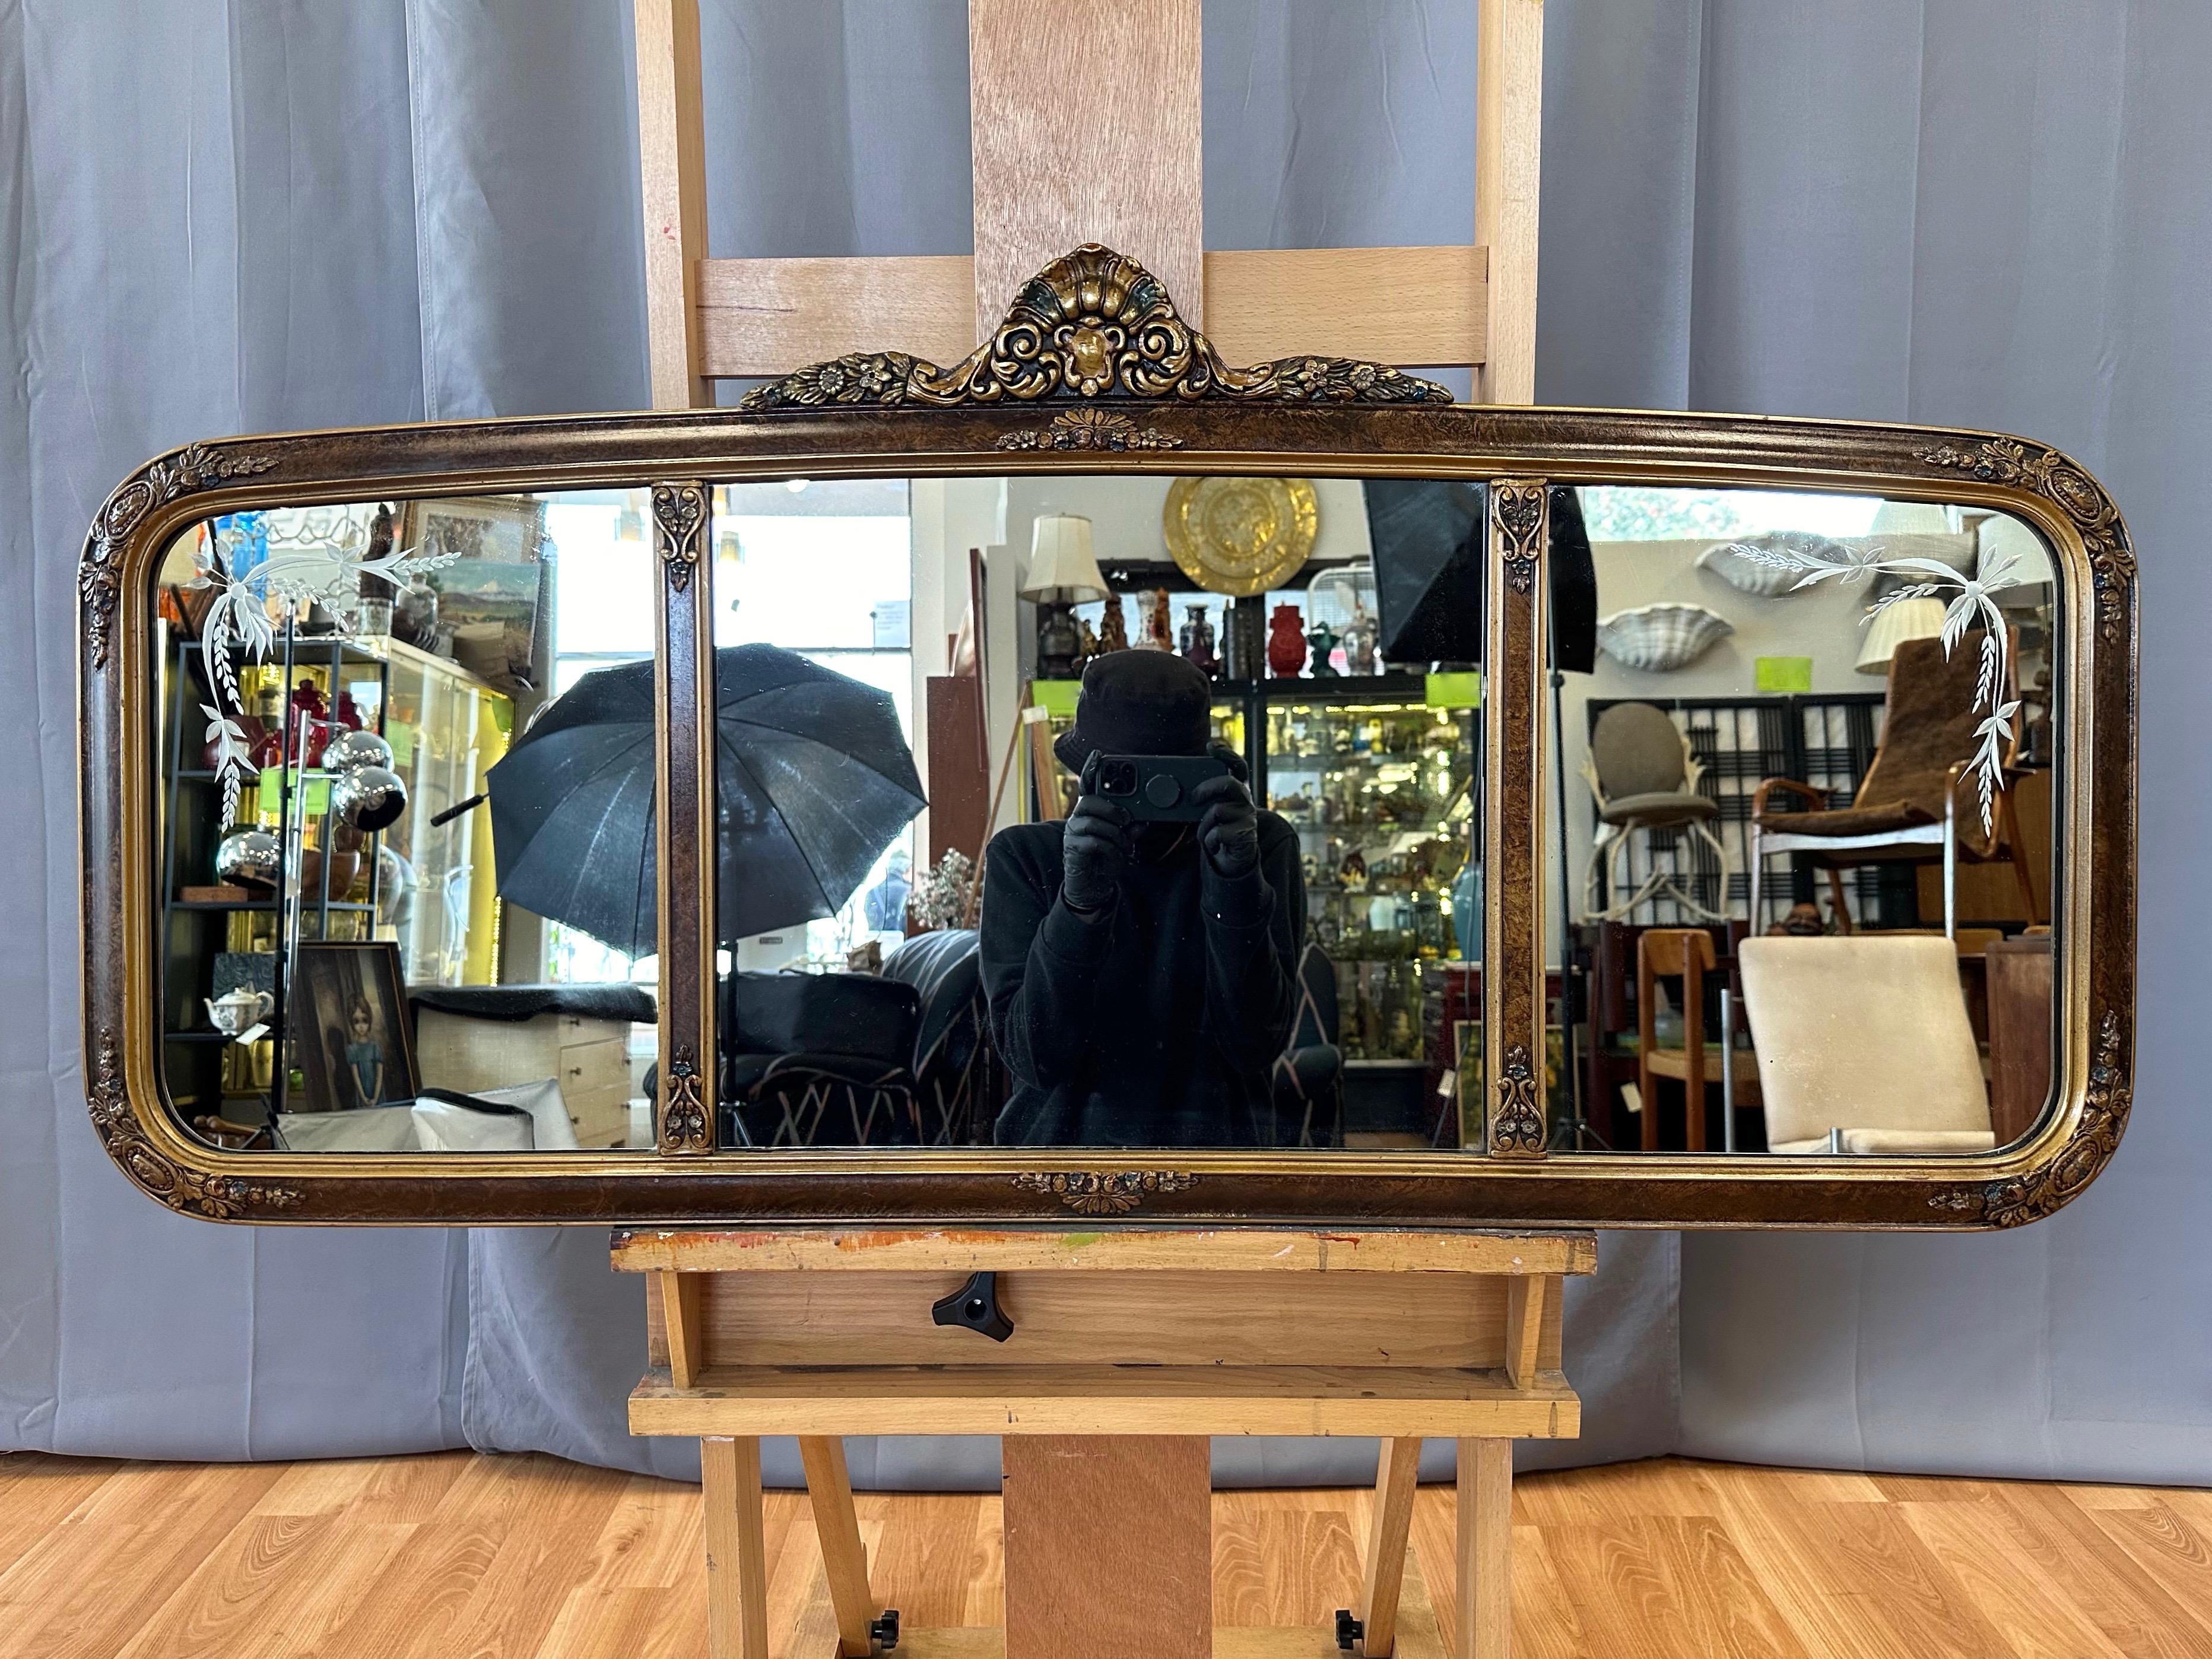 A brilliant circa 1910 Belle Époque-influenced Edwardian three-panel etched glass overmantel mirror with hand-crafted, hand-painted, and gilt-detailed frame.

Hand-crafted wide wood frame with hand-painted faux-leather finish and antiqued gilt trim.